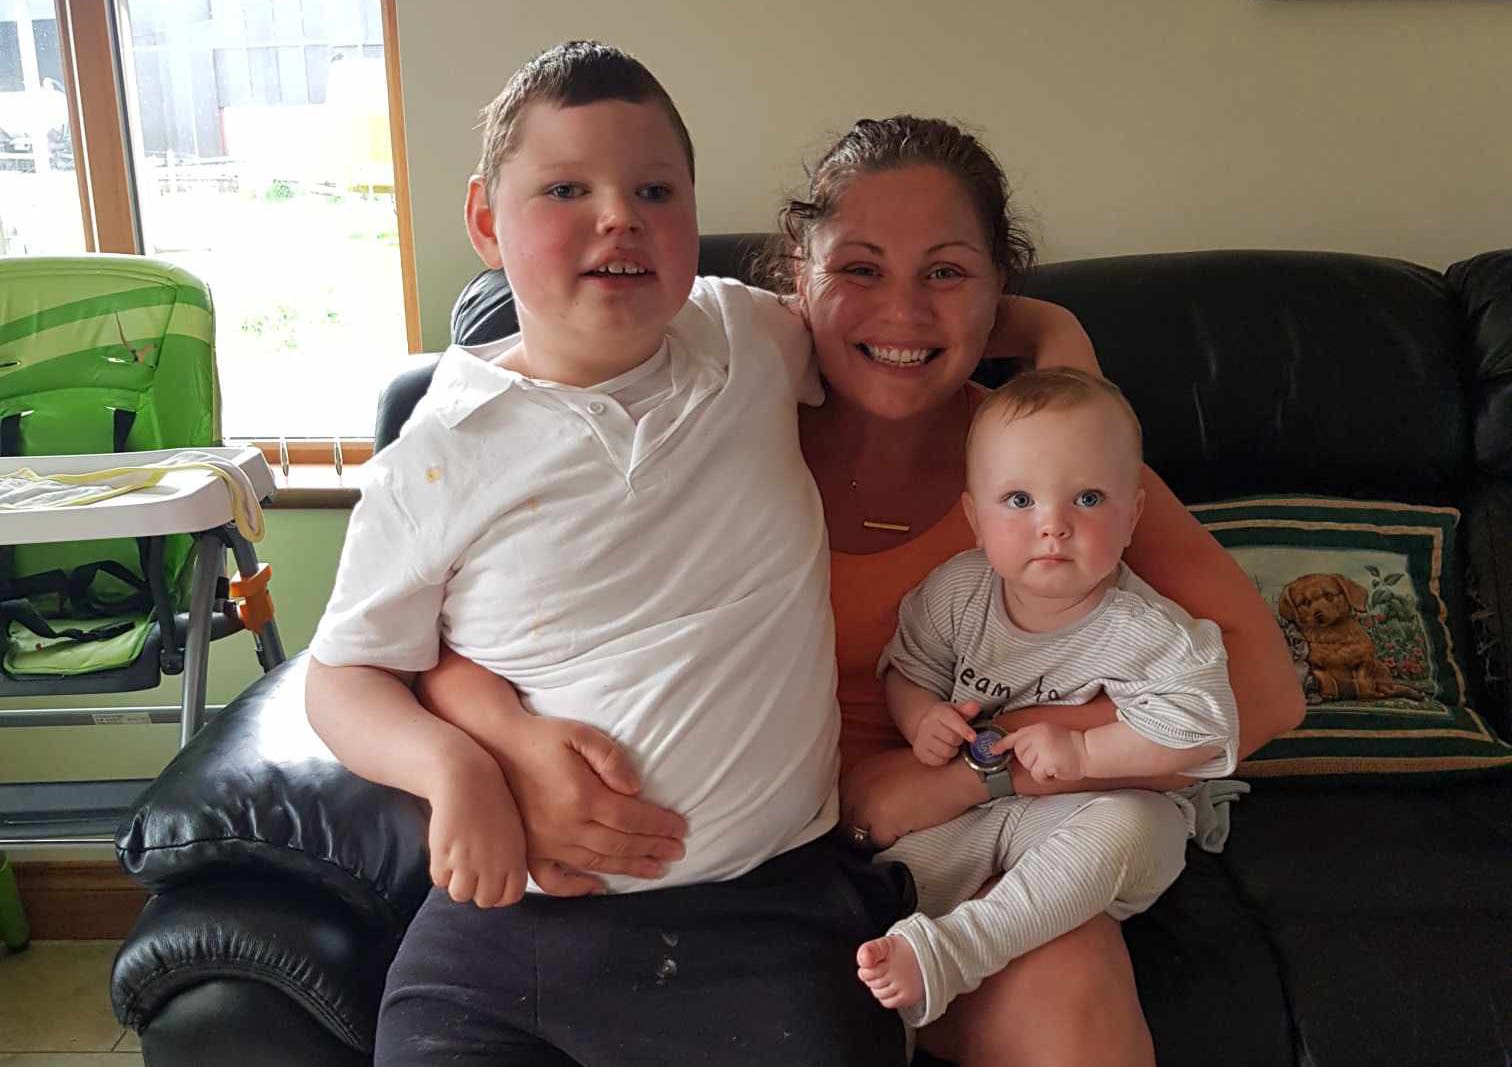 Paula Magee with her sons Cillian (left) and Cathal